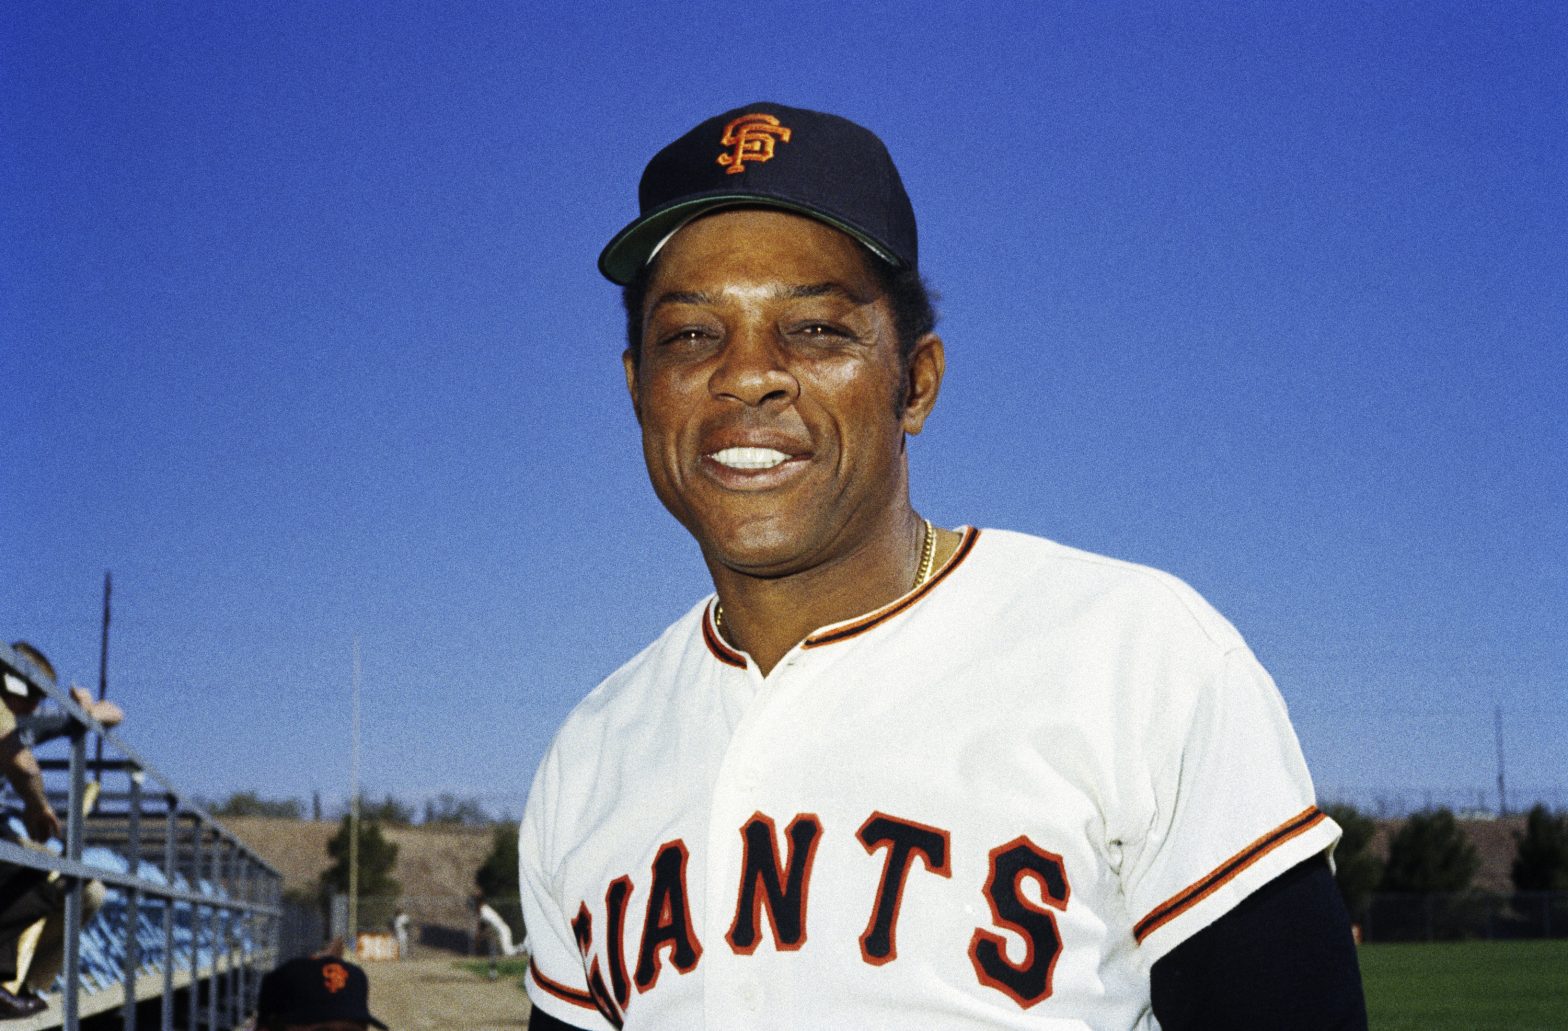 Willie Mays Appreciation: The ‘Say Hey Kid’ Inspired Generations With Talent and Exuberance